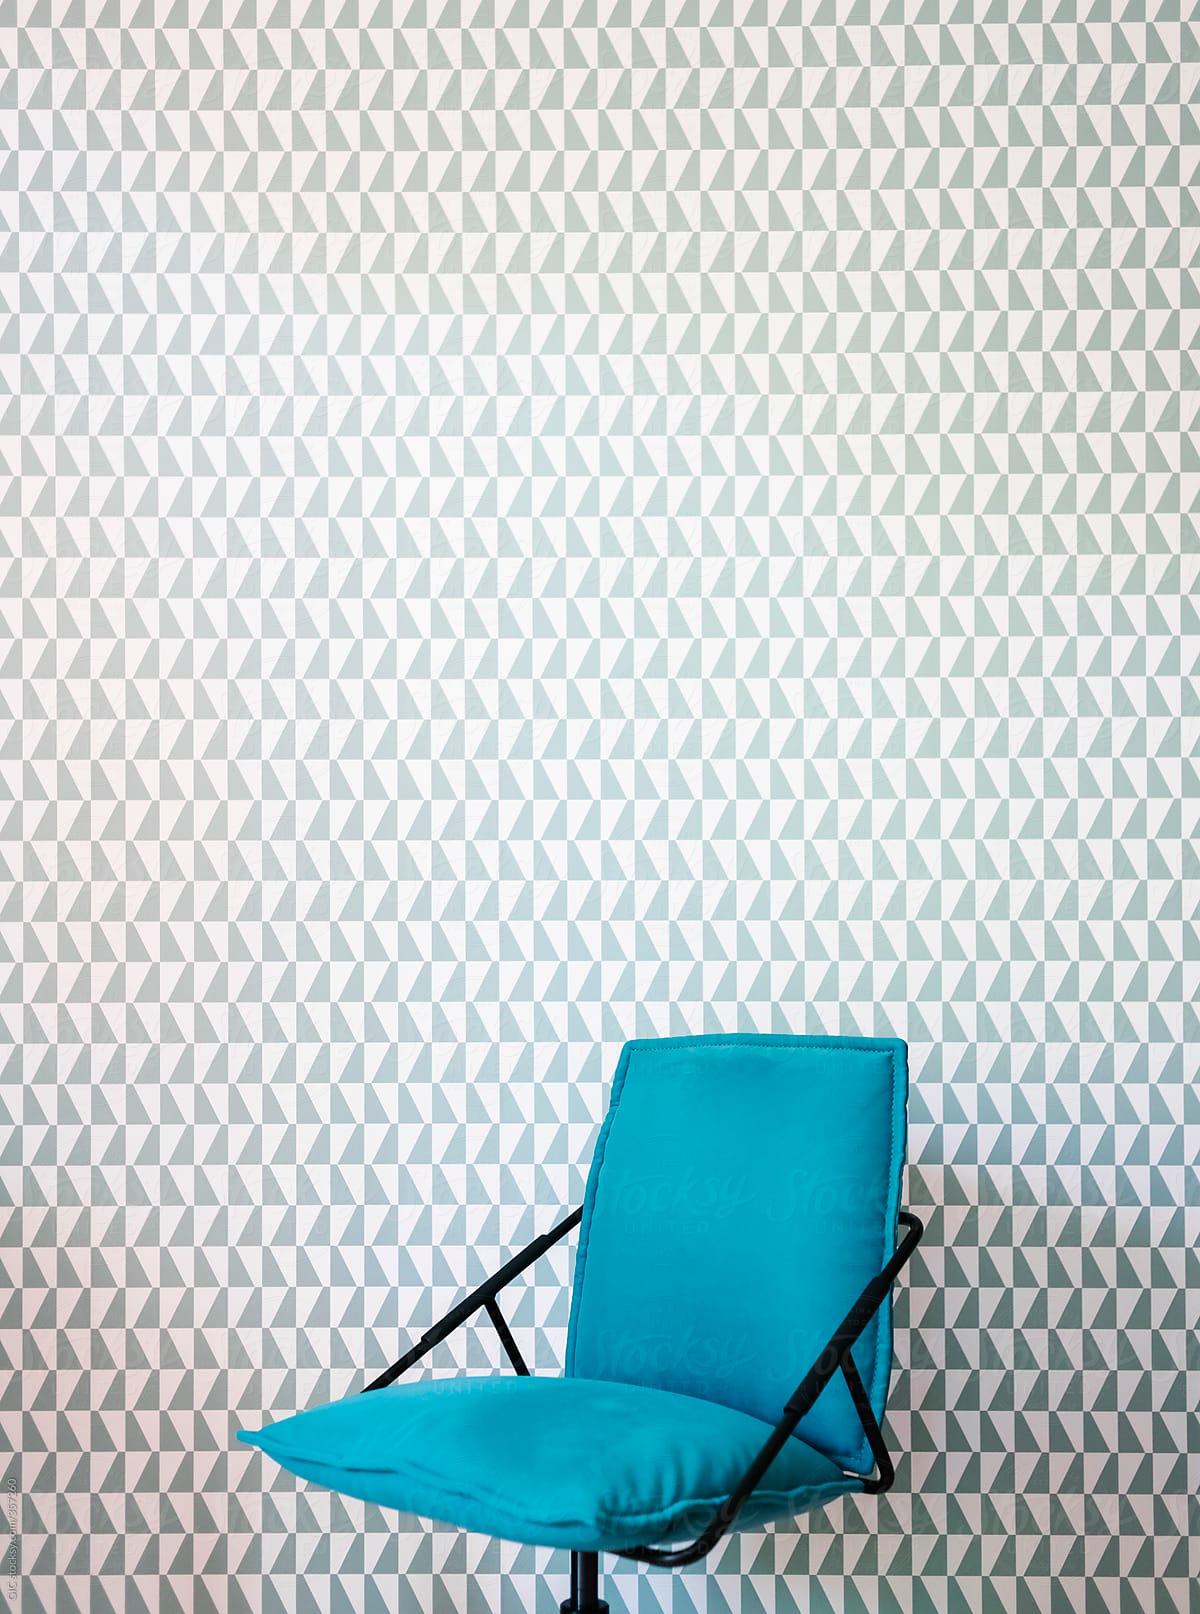 Blue office chair against pattern wallpaper